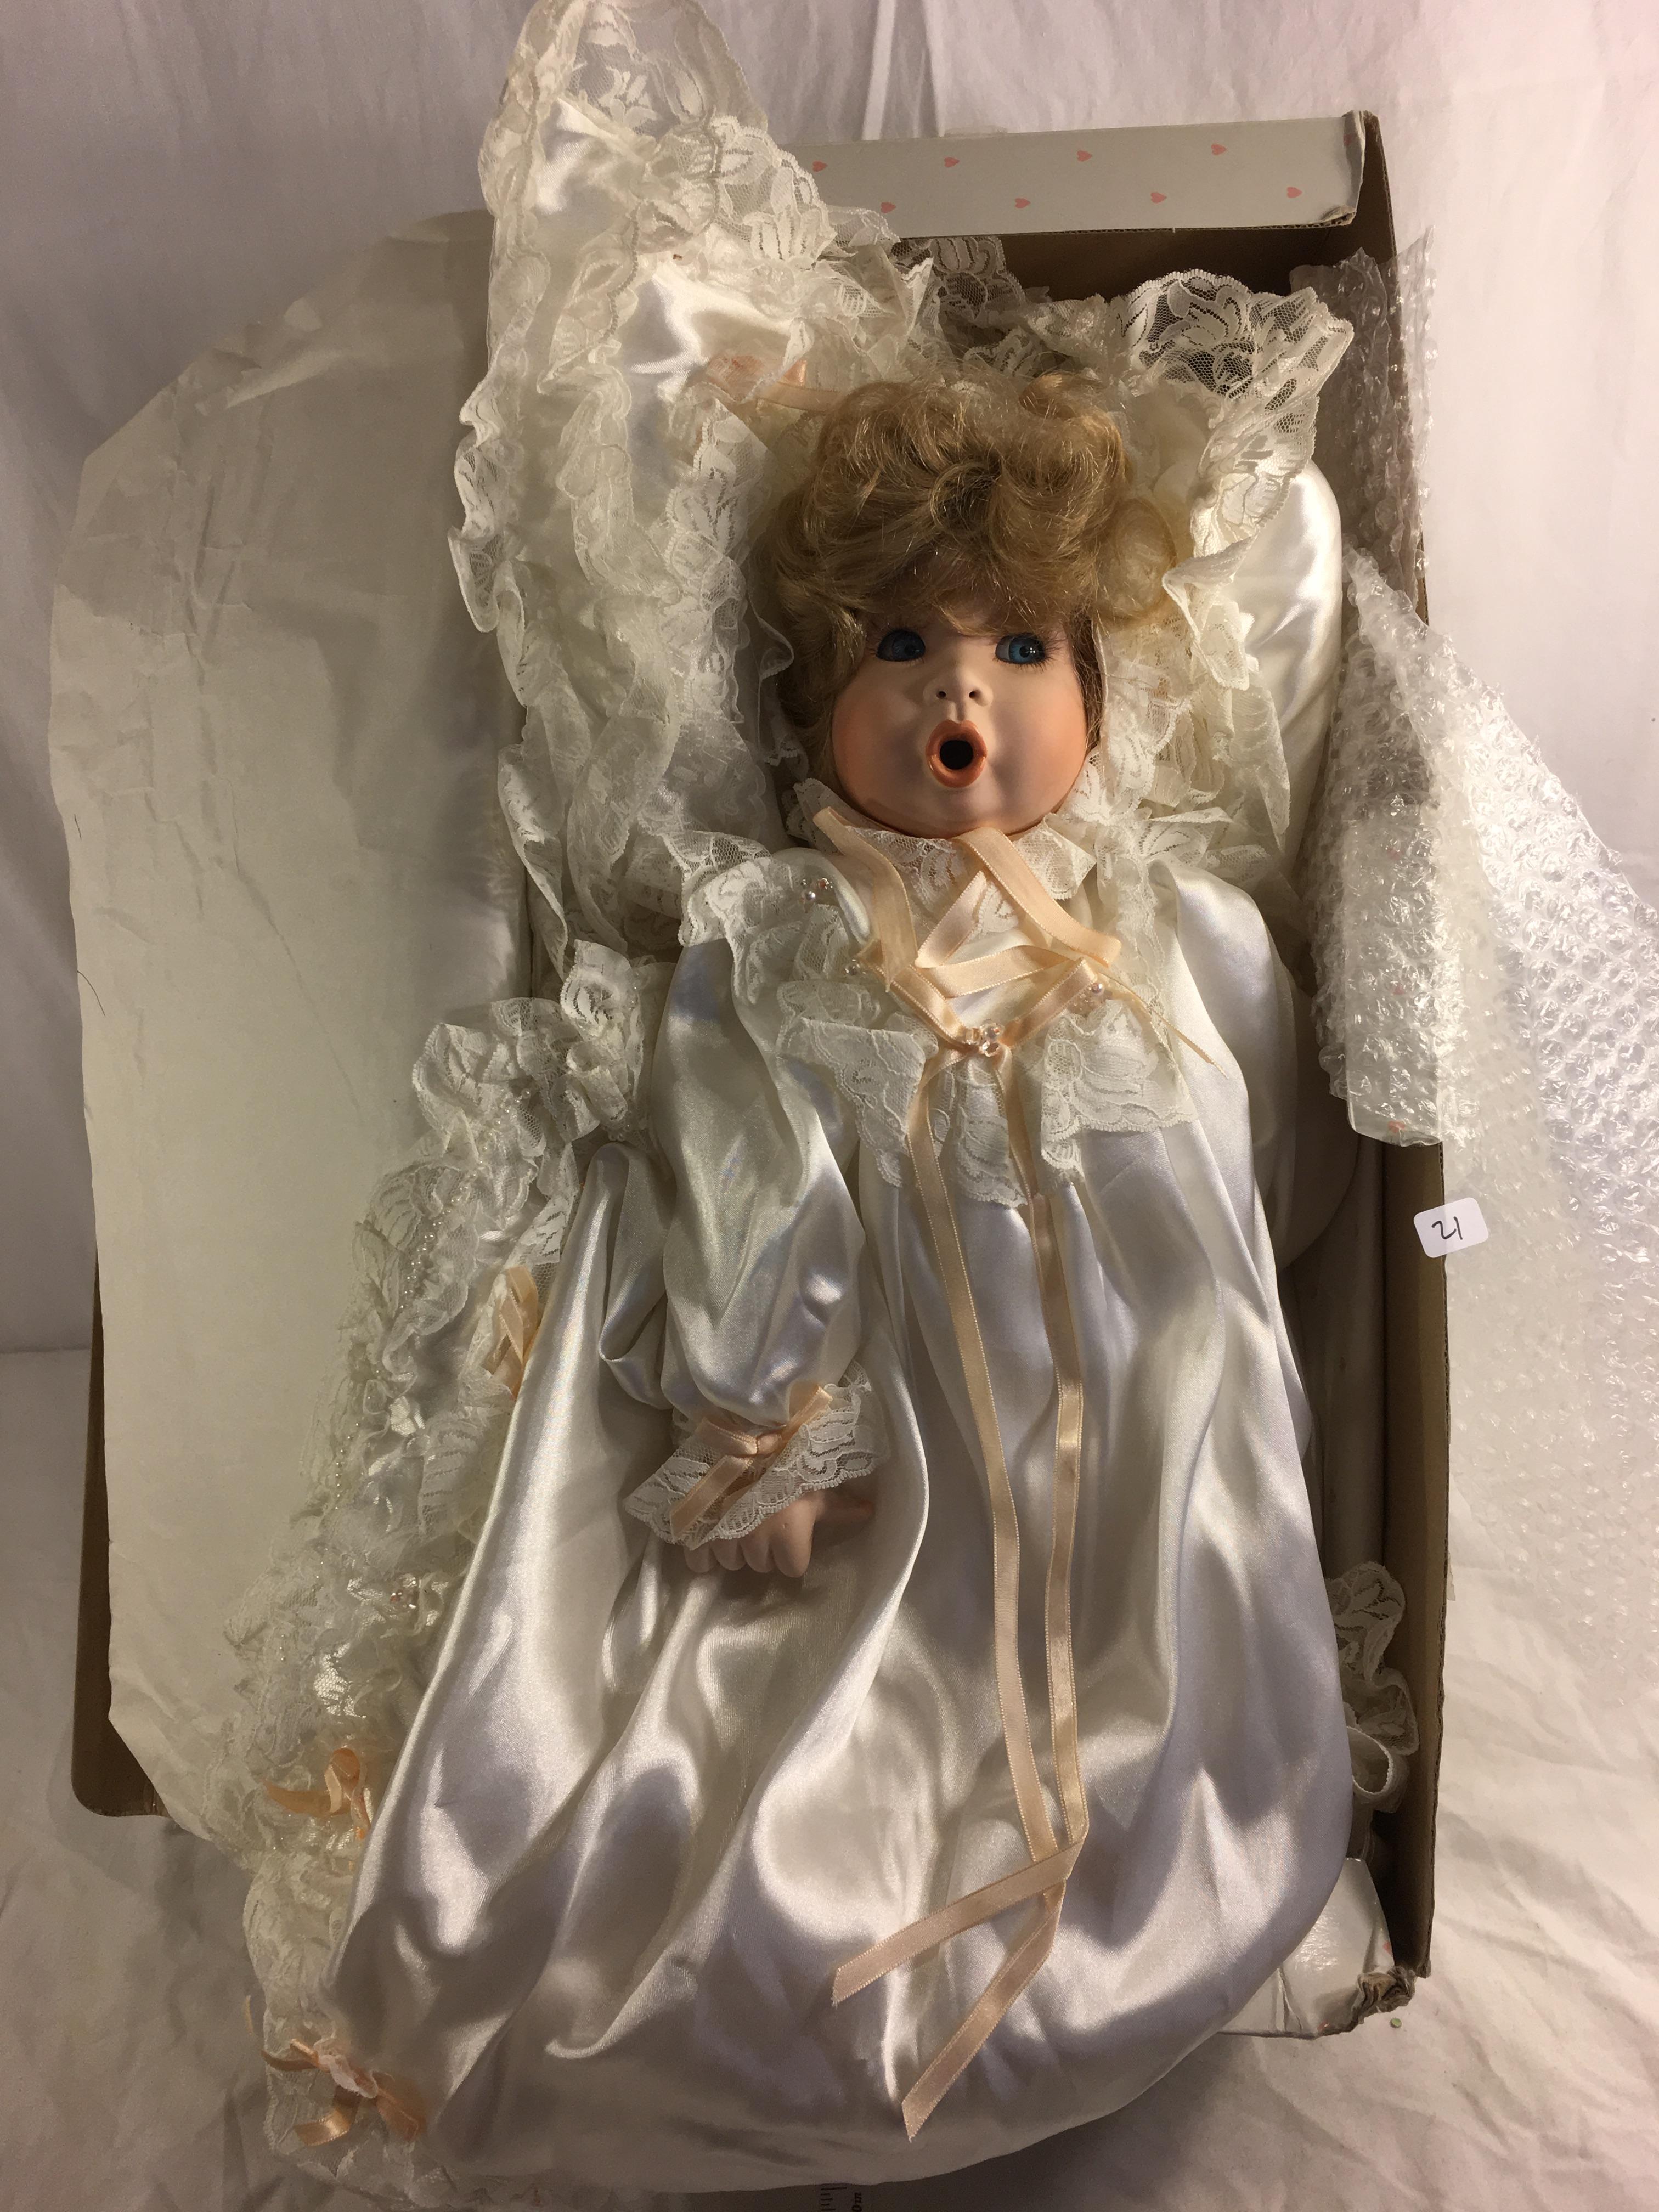 Collector Loose in Box Baby Girl With Big Pillow Porcelain Baby Doll 21"Tall Box Size